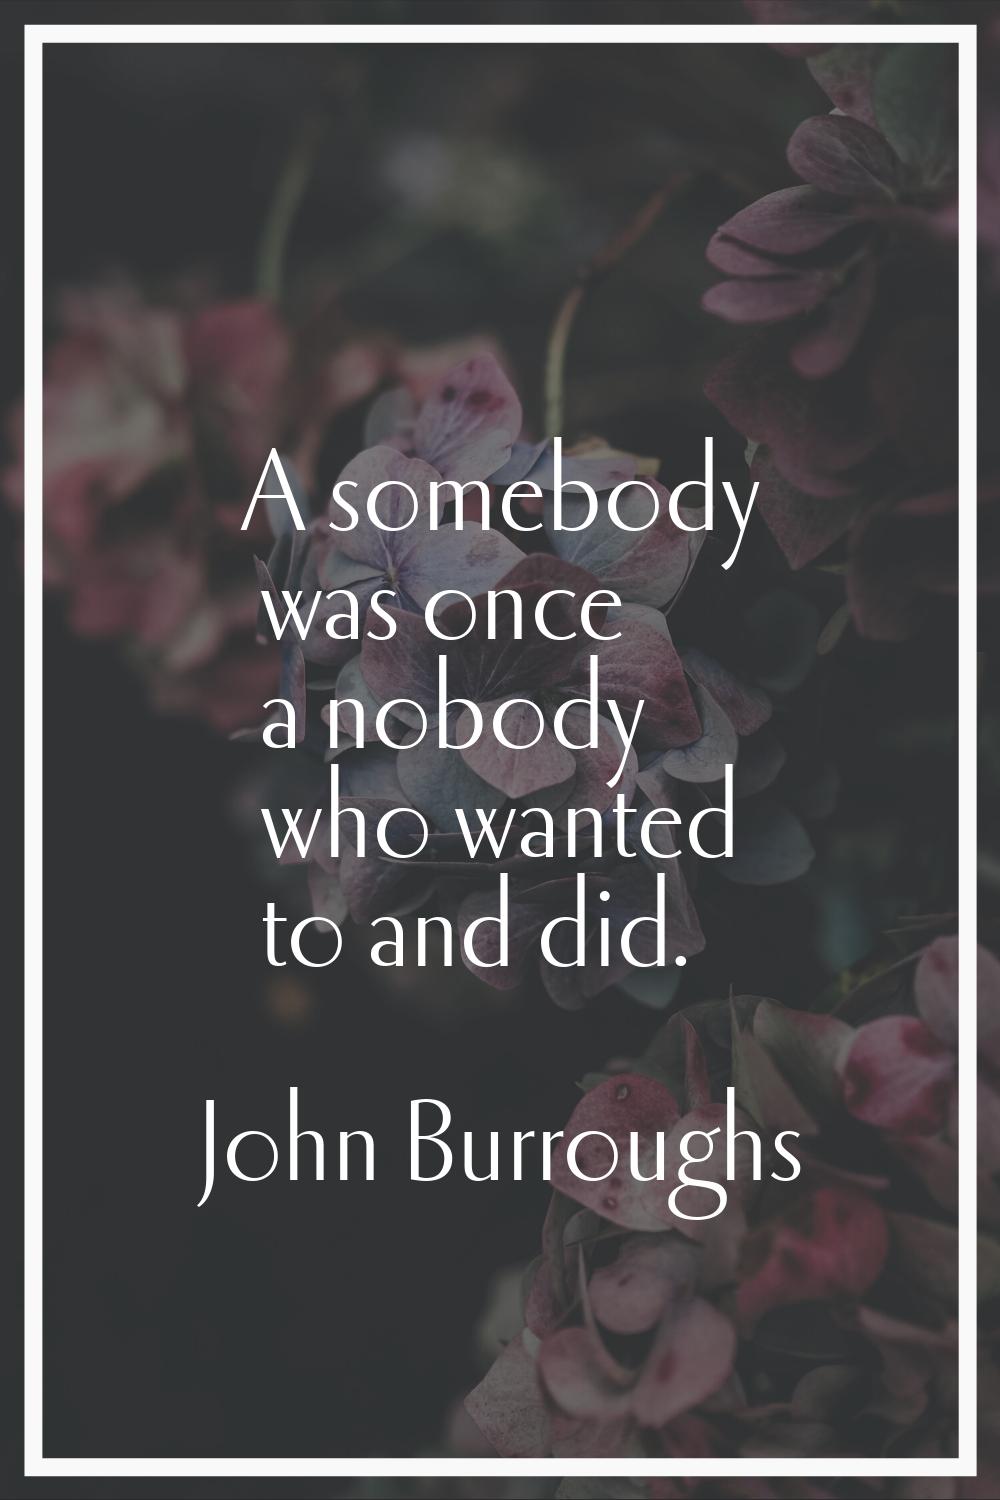 A somebody was once a nobody who wanted to and did.